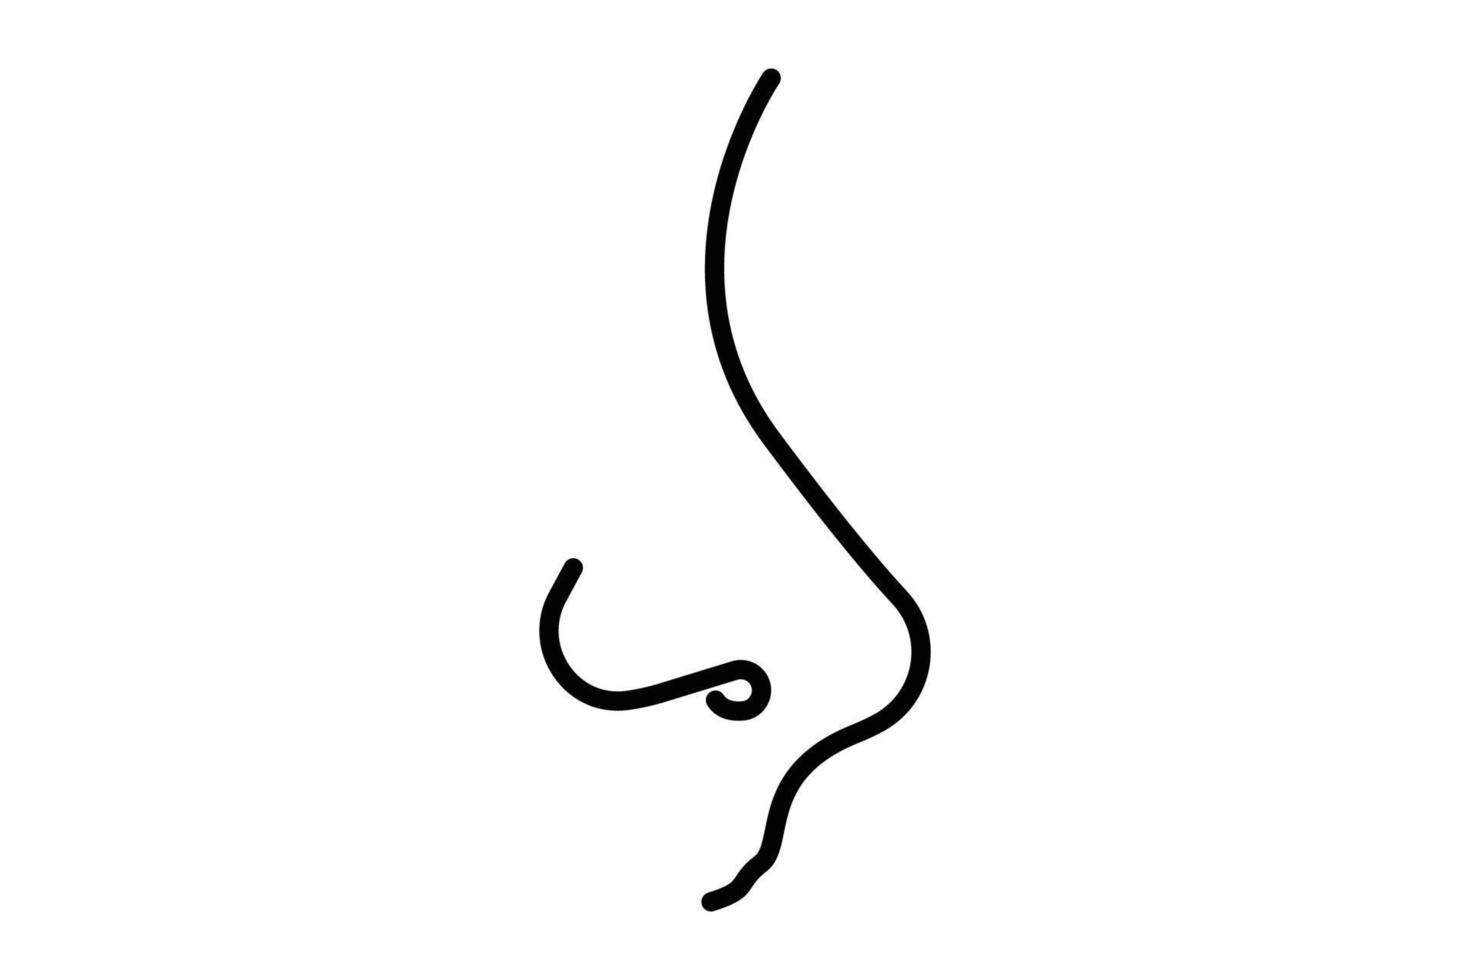 Nose icon illustration. icon related to human organ. Line icon style. Simple vector design editable